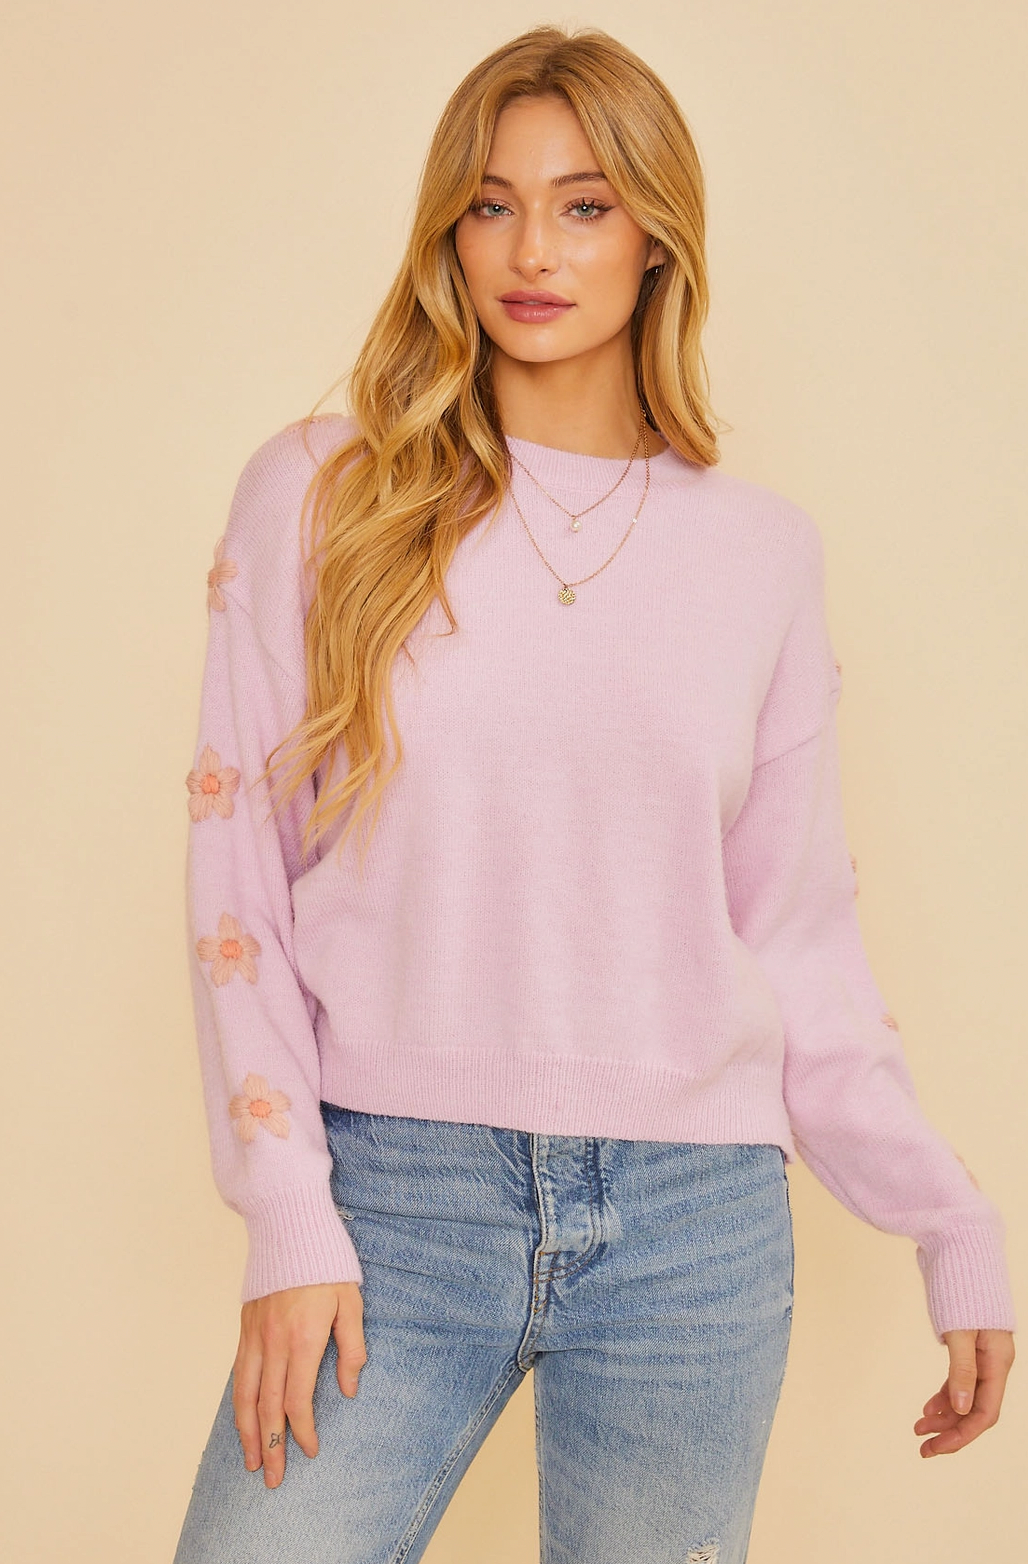 Lilac Sweater with Crochet Flower Sleeves